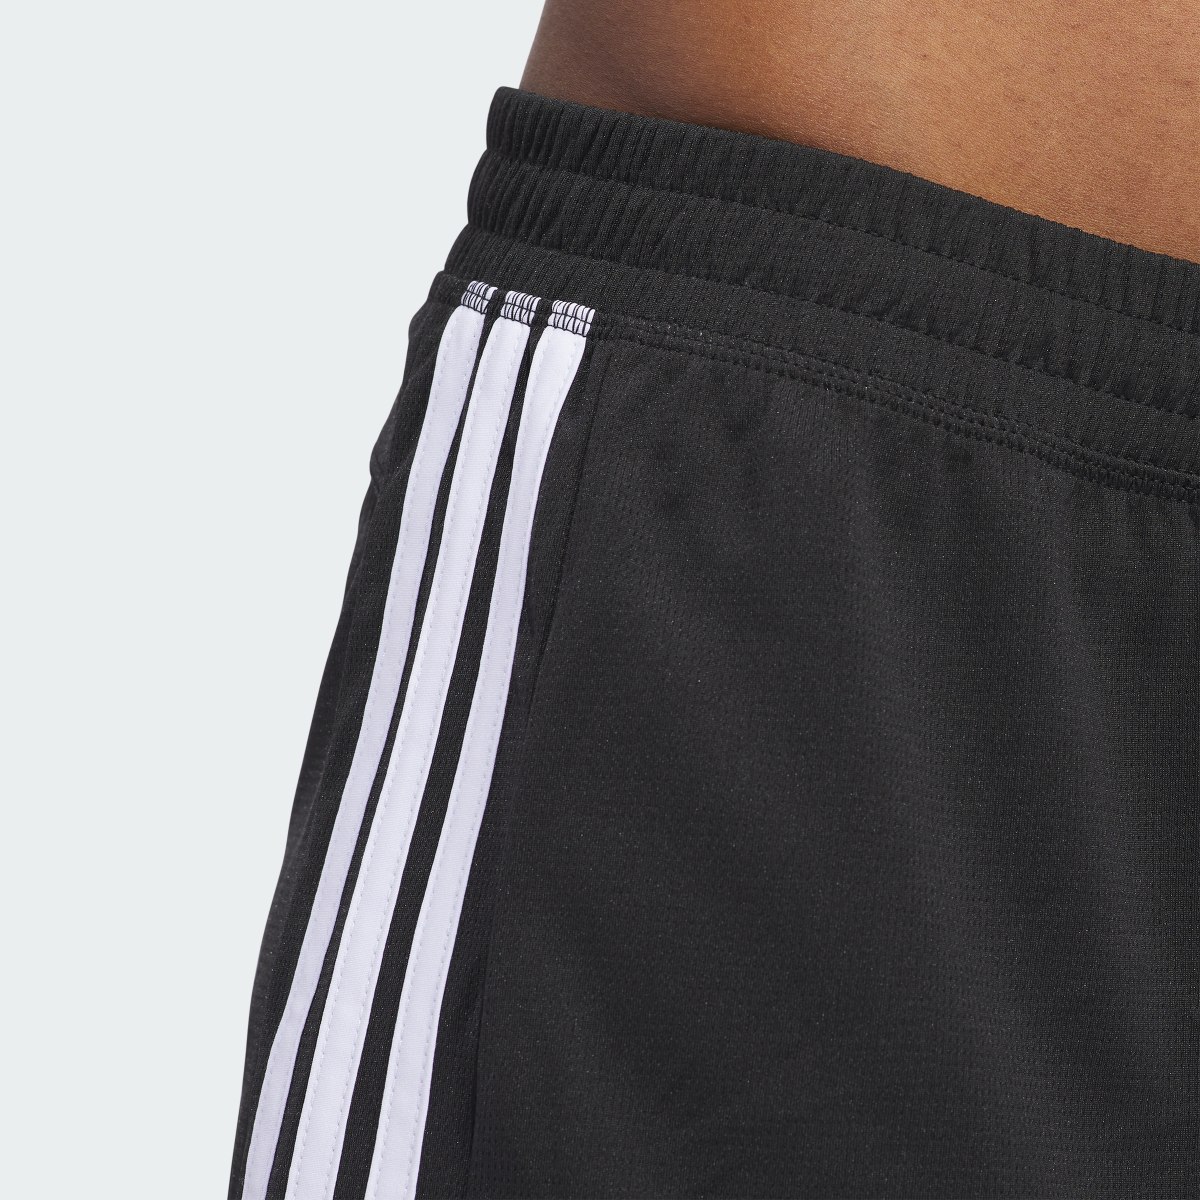 Adidas Short Pacer 3-Stripes Knit. 7